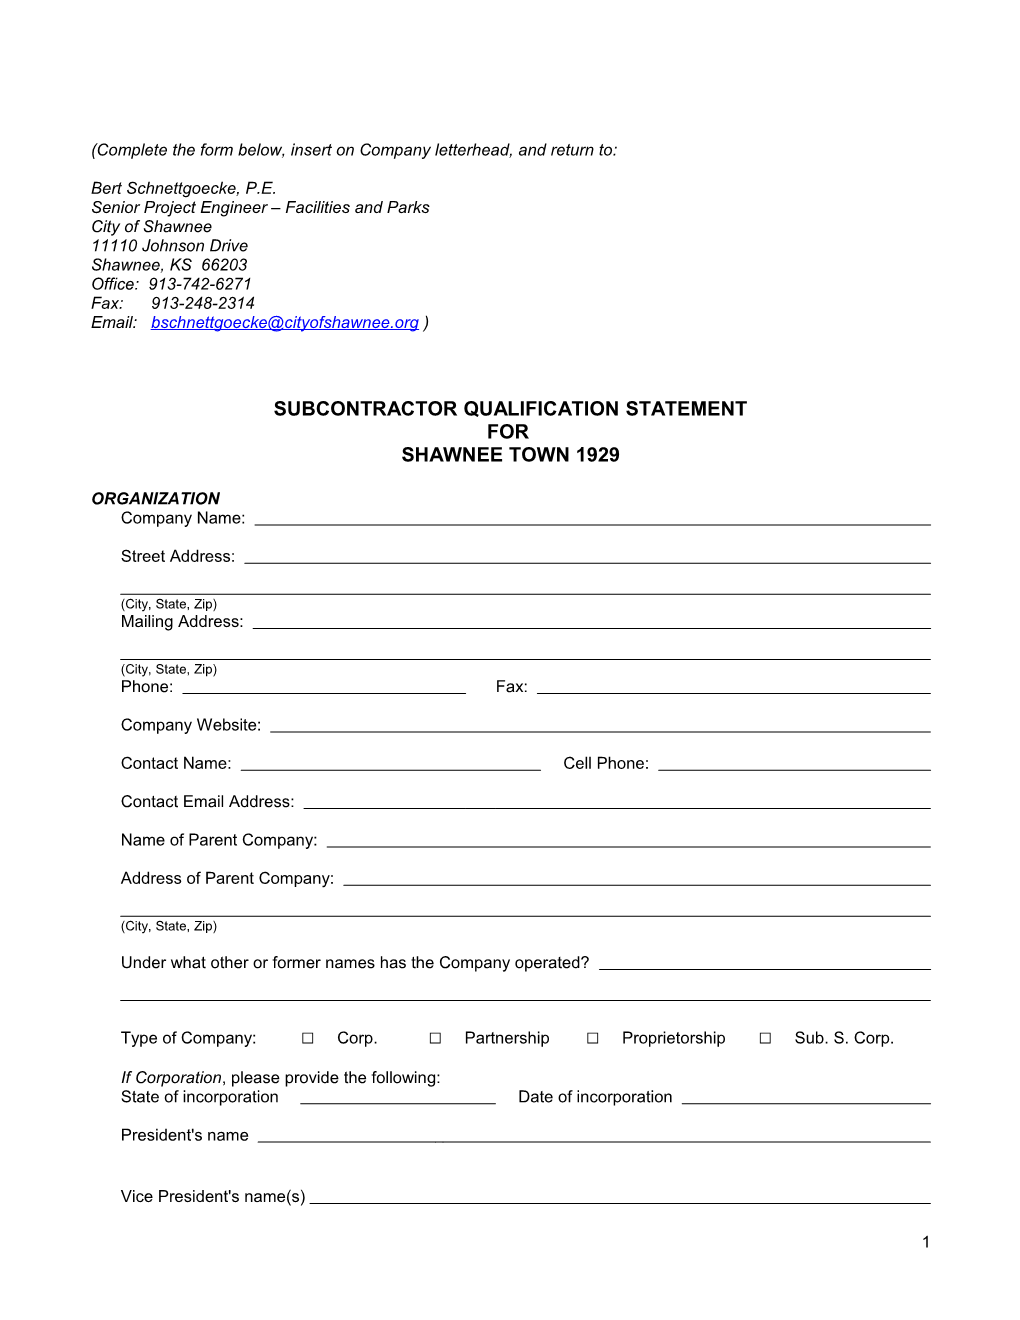 (Complete the Form Below, Insert on Company Letterhead, and Return To